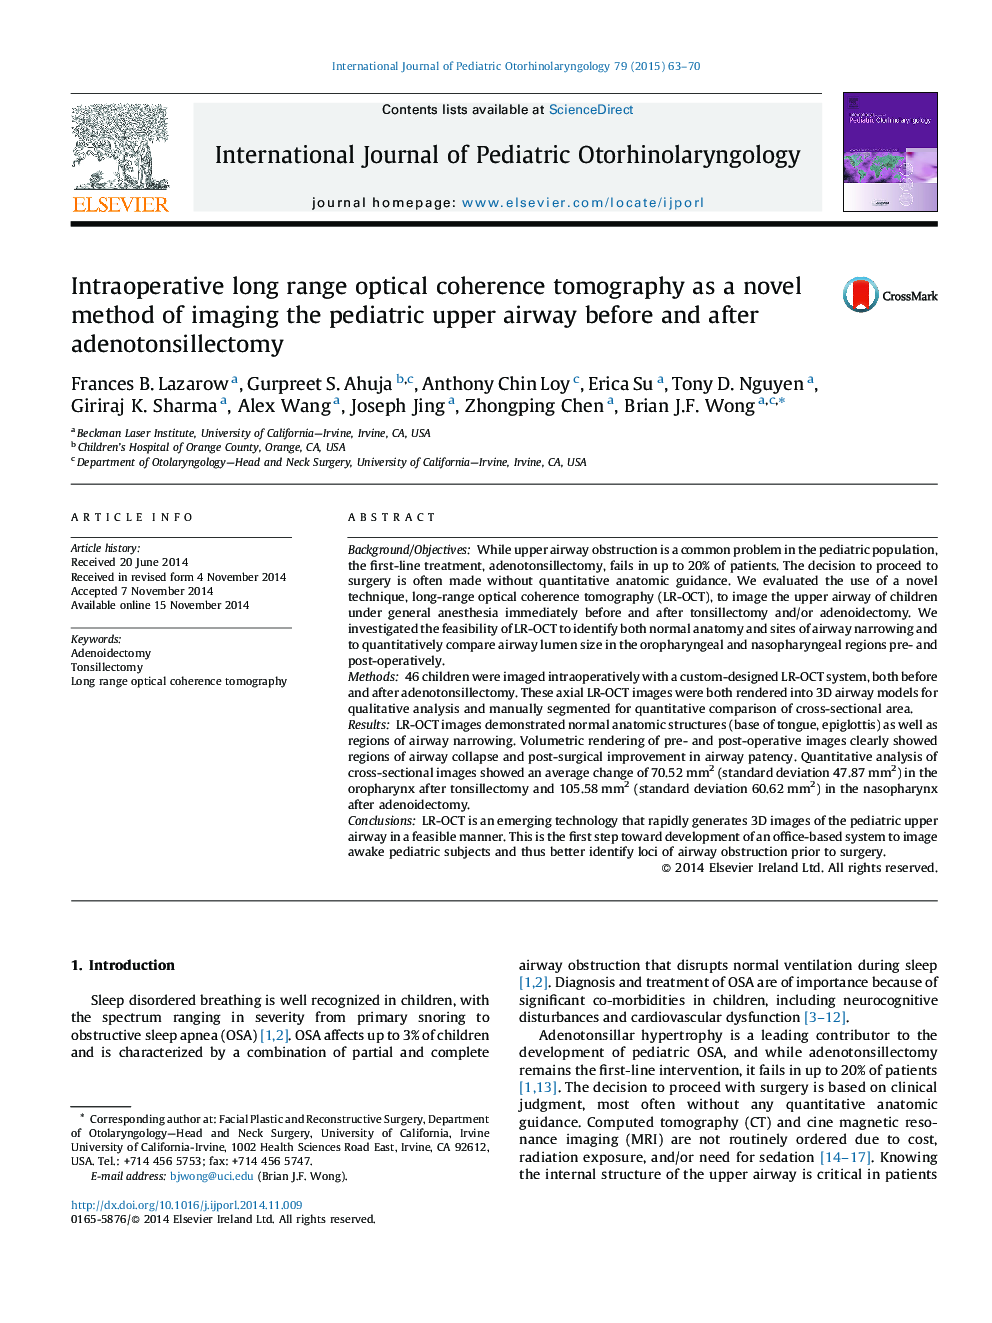 Intraoperative long range optical coherence tomography as a novel method of imaging the pediatric upper airway before and after adenotonsillectomy